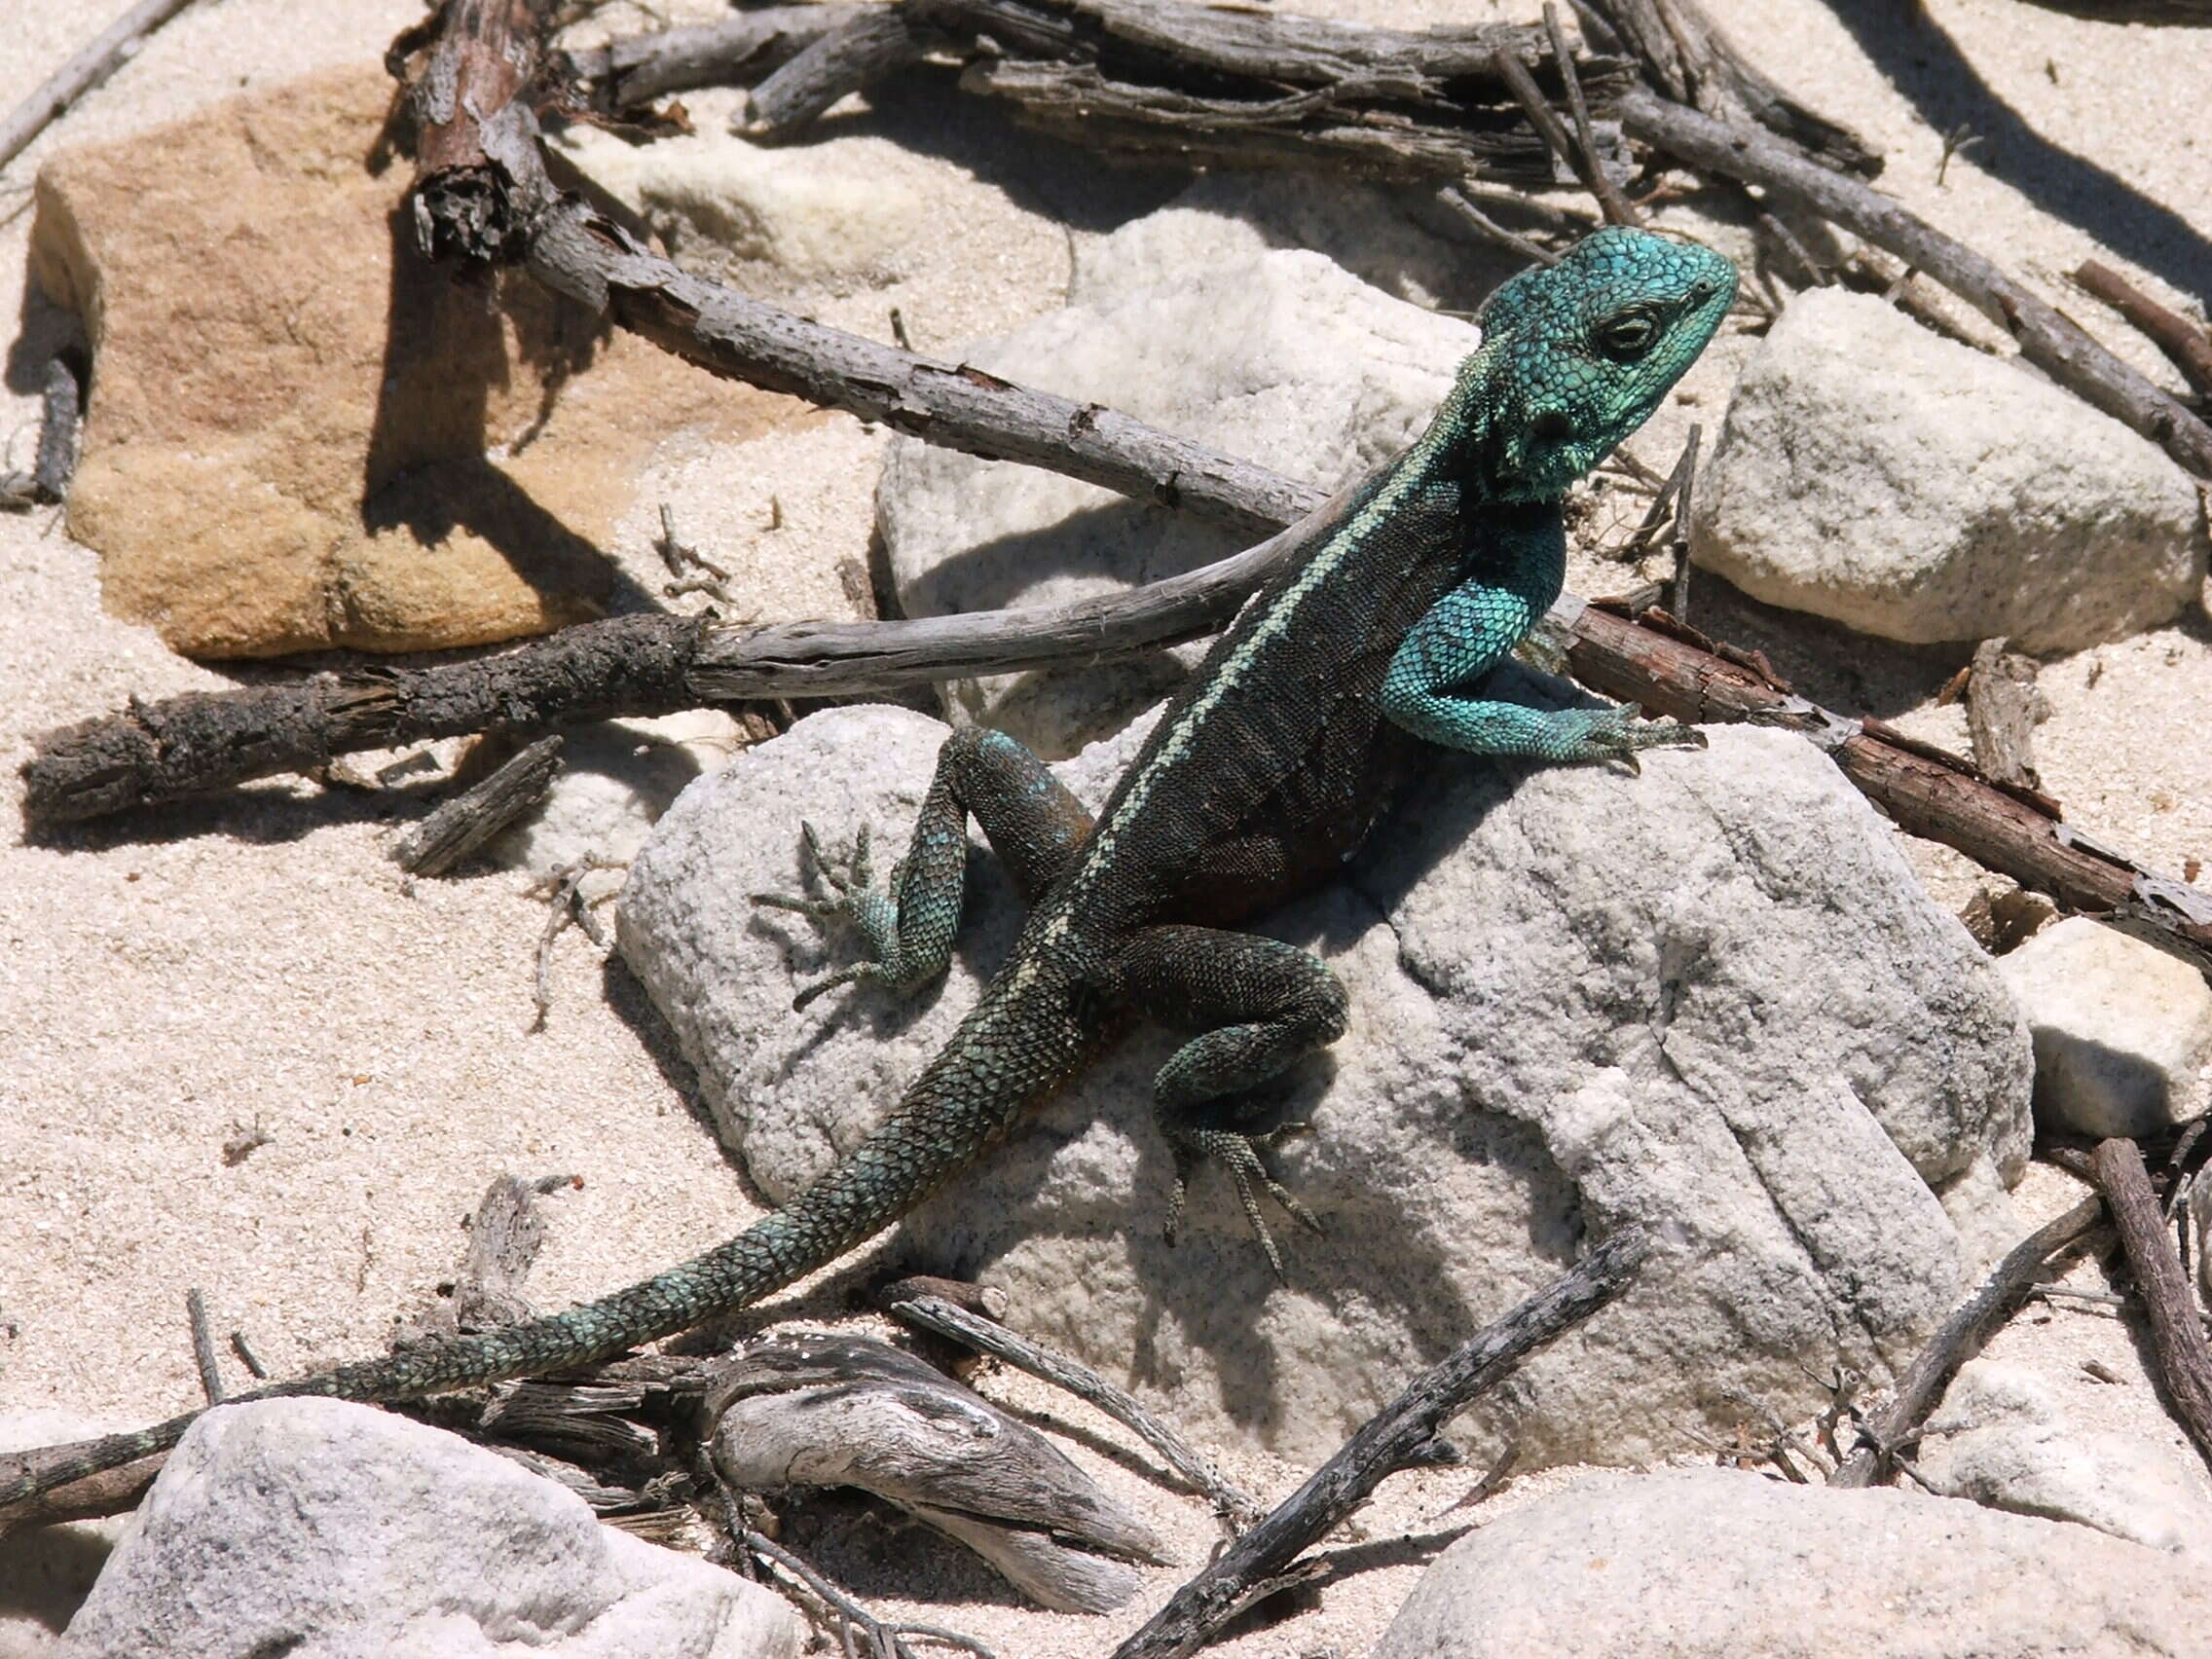 Image of southern rock agama